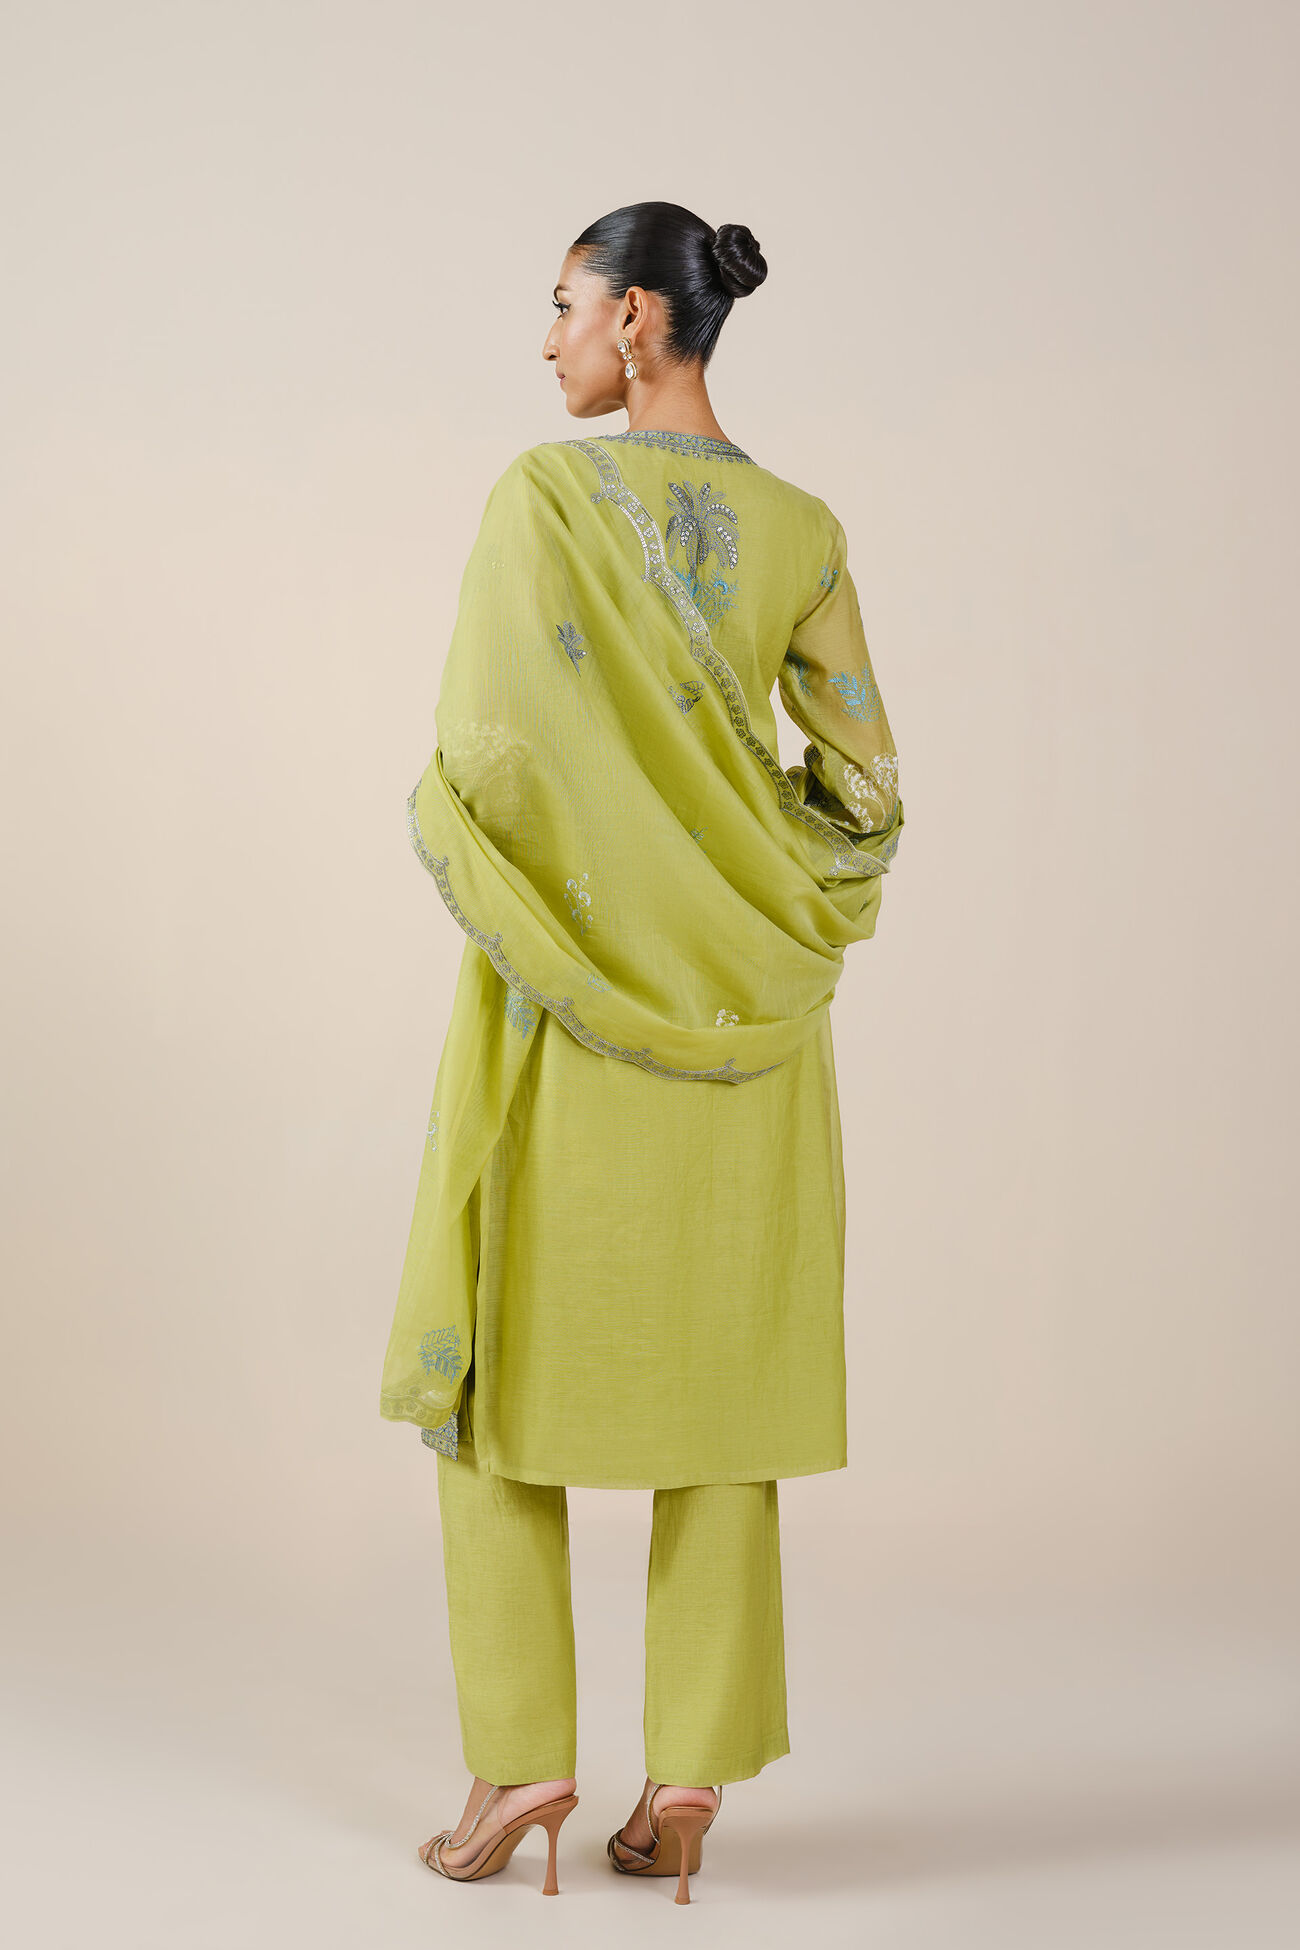 Pelagia Embroidered Mul Suit Set - Lime, Lime, image 3